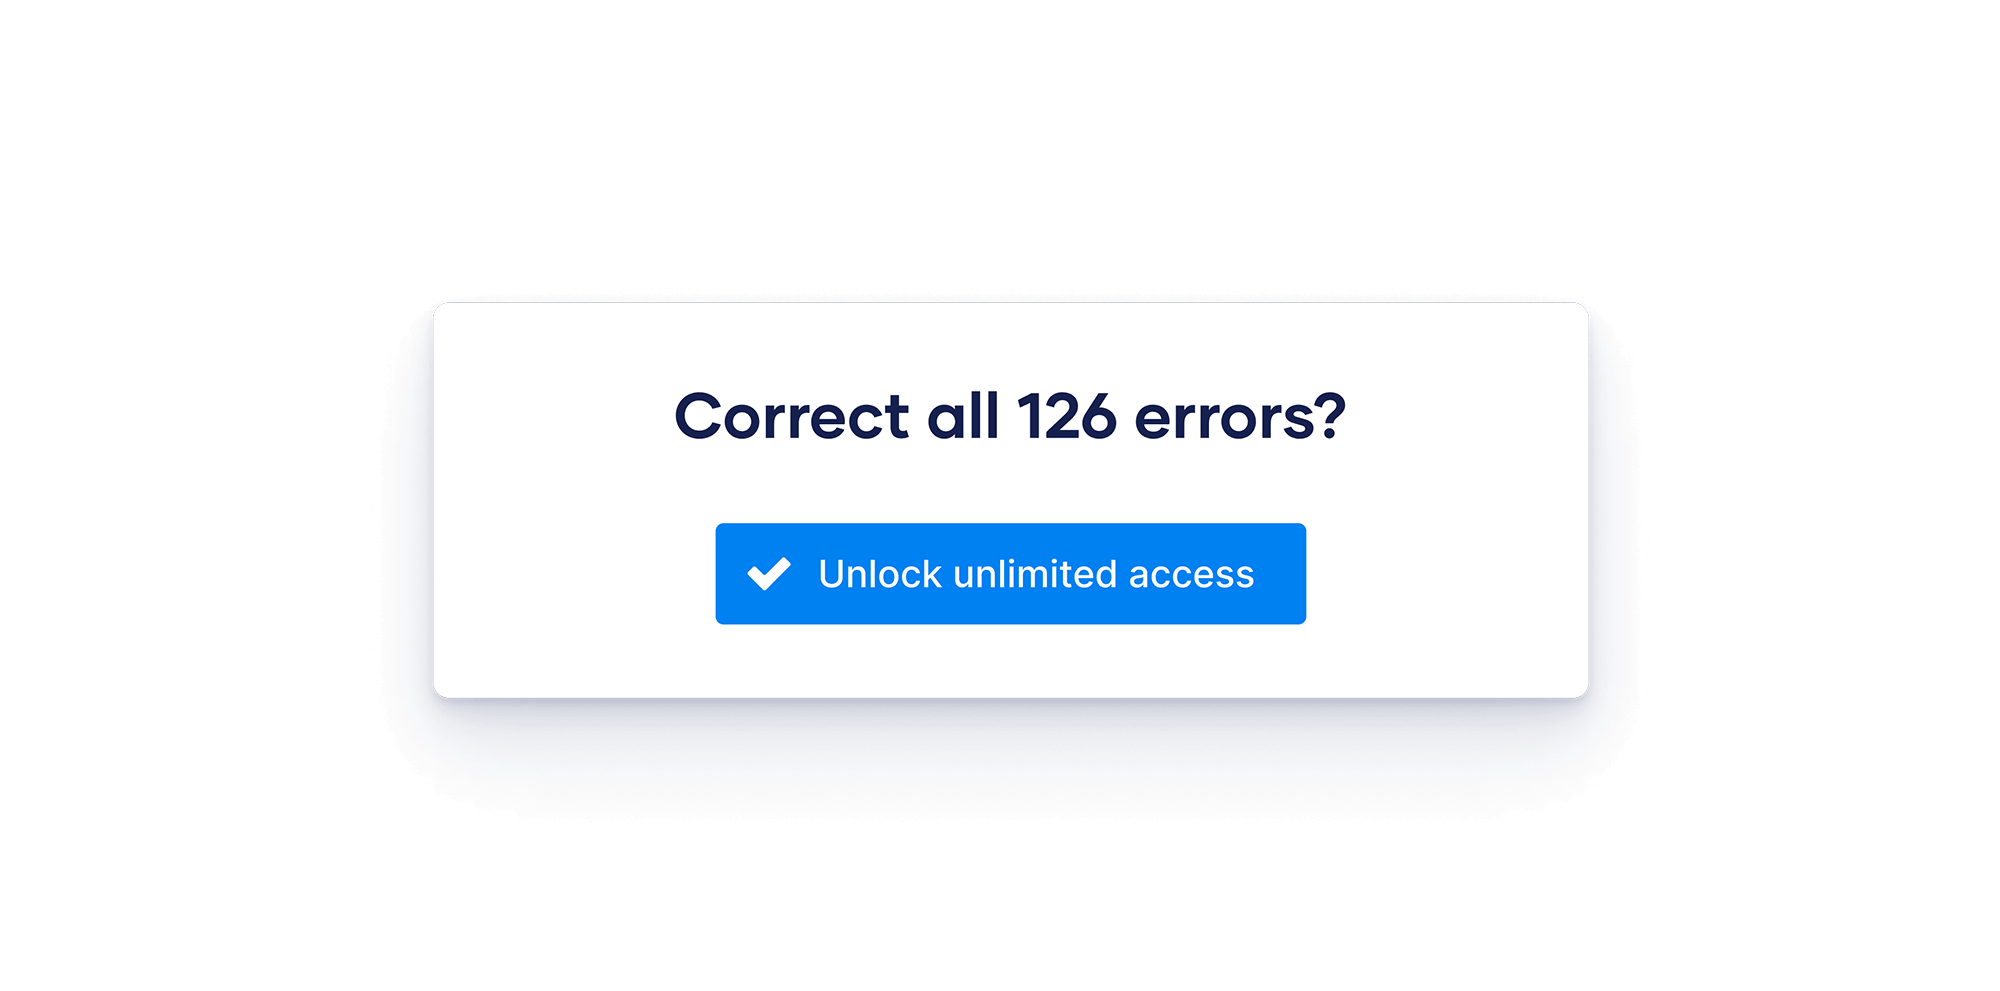 Review all corrections in detail by unlocking unlimited access